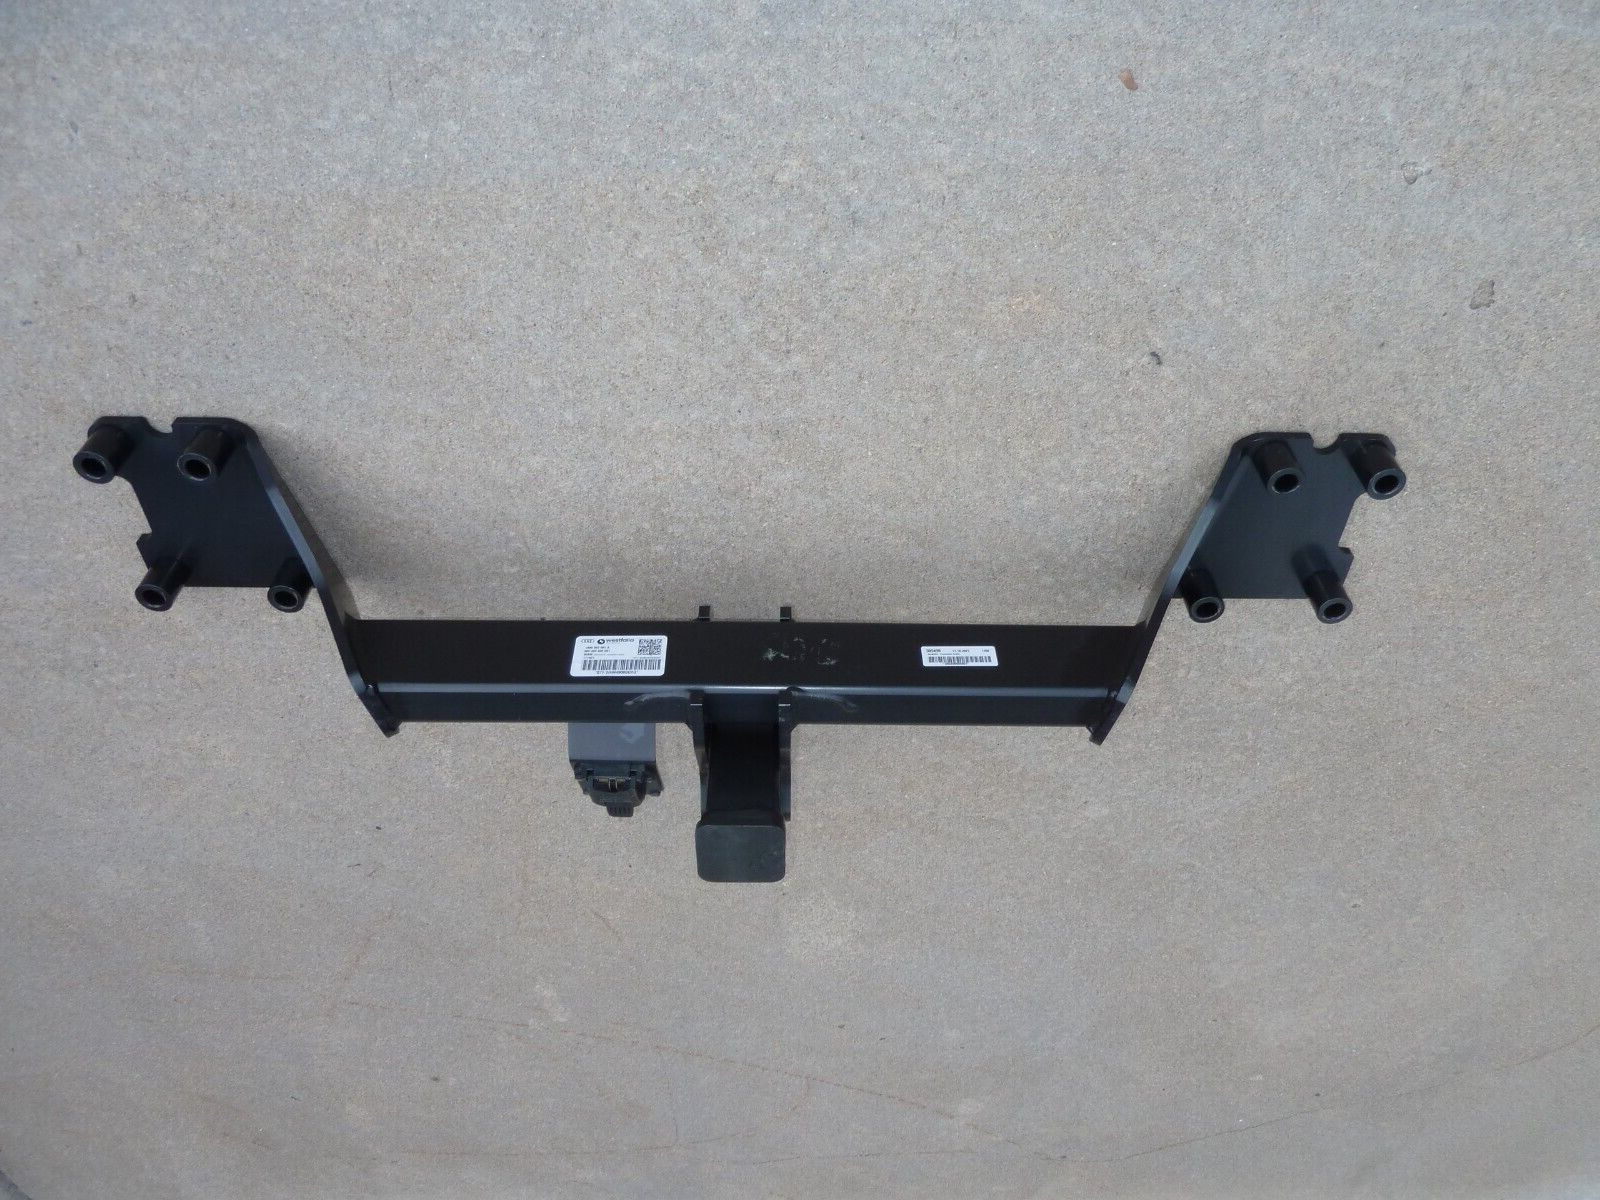 2019-23 Audi Q8 SQ8 RSQ8 Trailer Tow Hitch Bracket Towing Bar Connector OEM